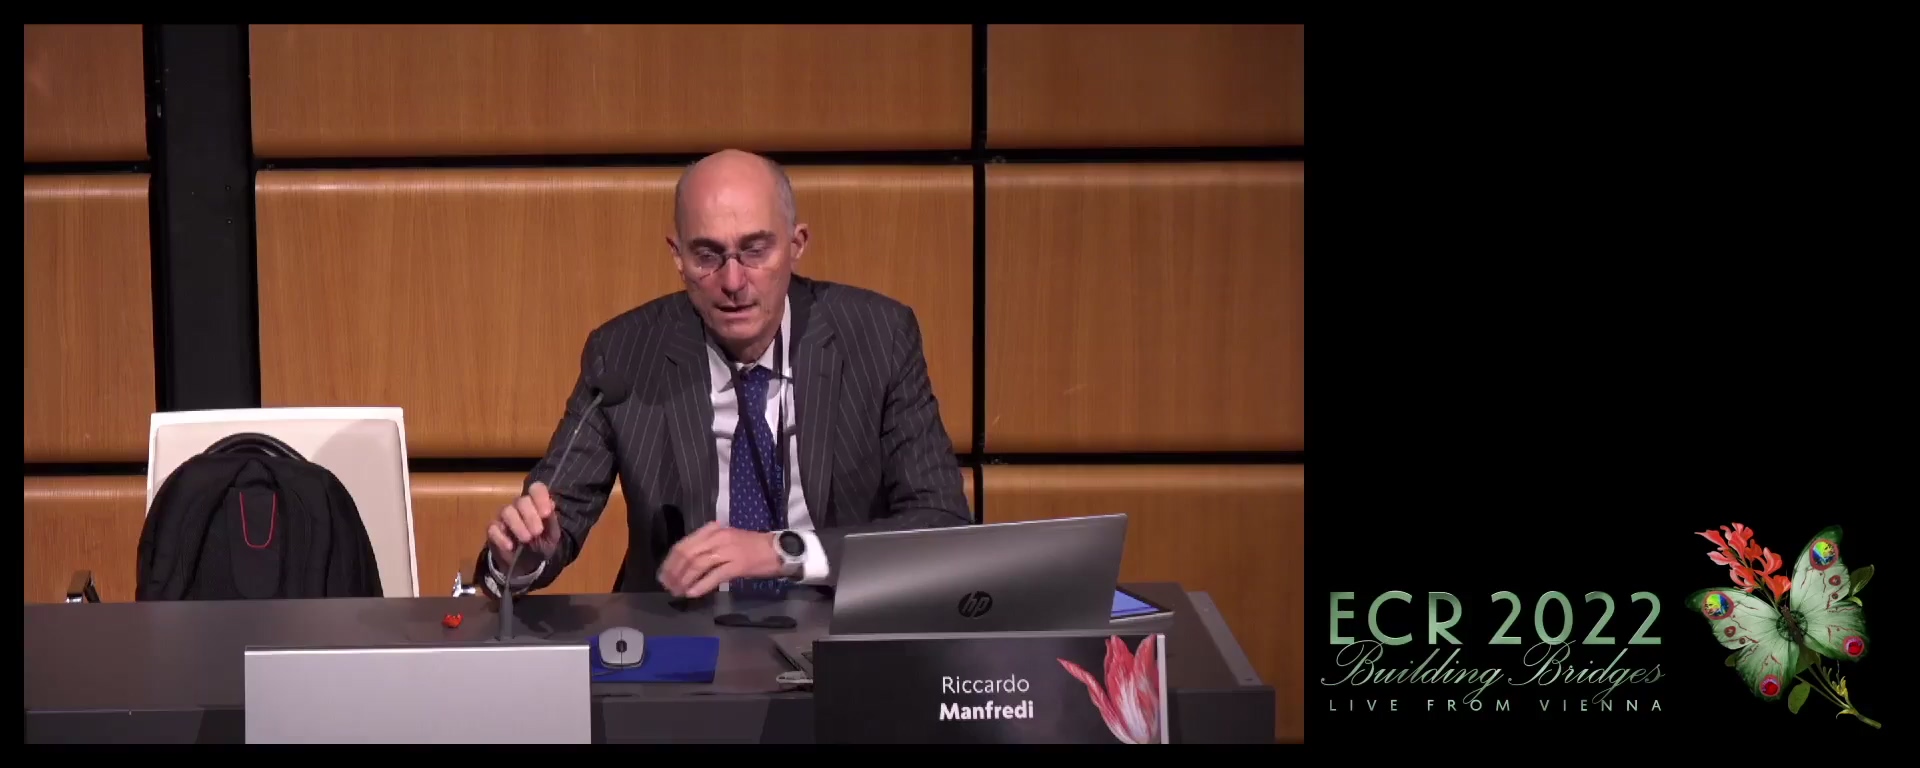 Introduction by the moderator - Riccardo Manfredi, Rome / IT